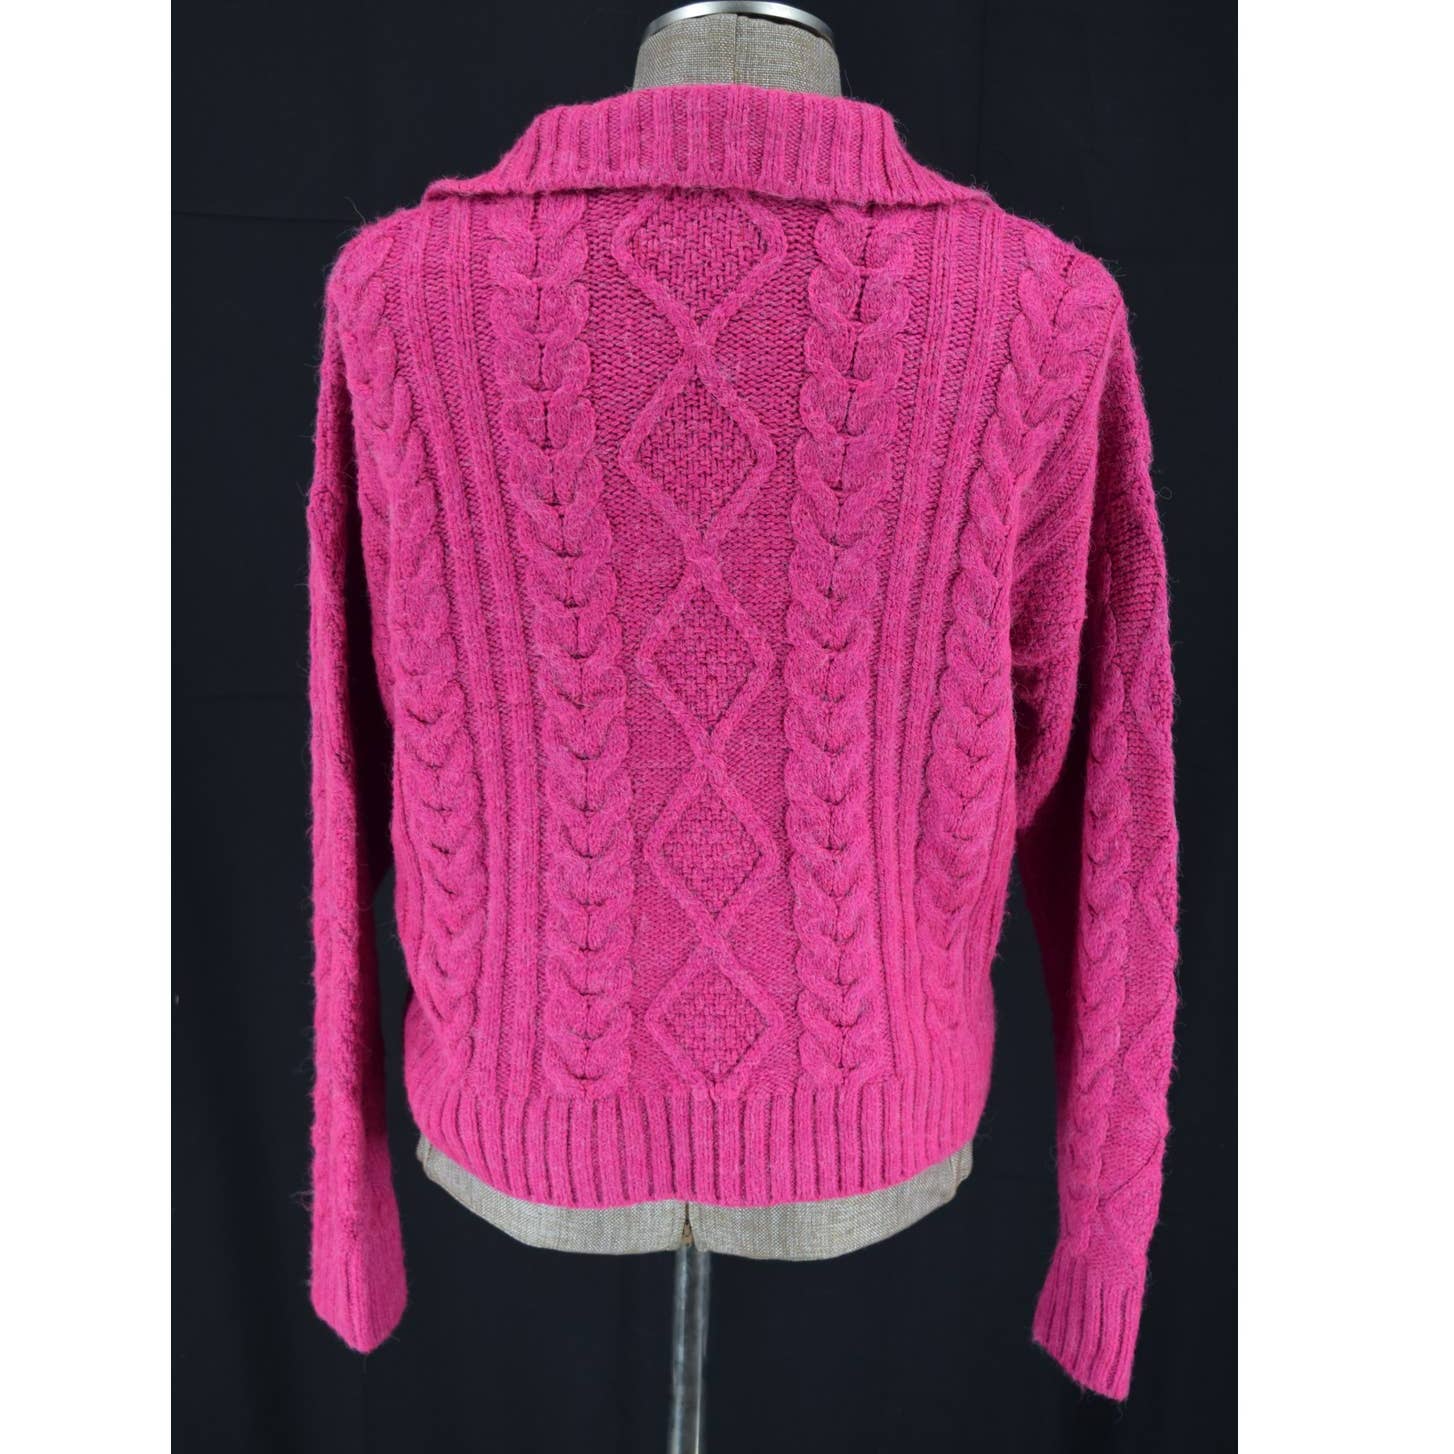 Anthropologie Pink Zip Up Cable Knit Sweater - M